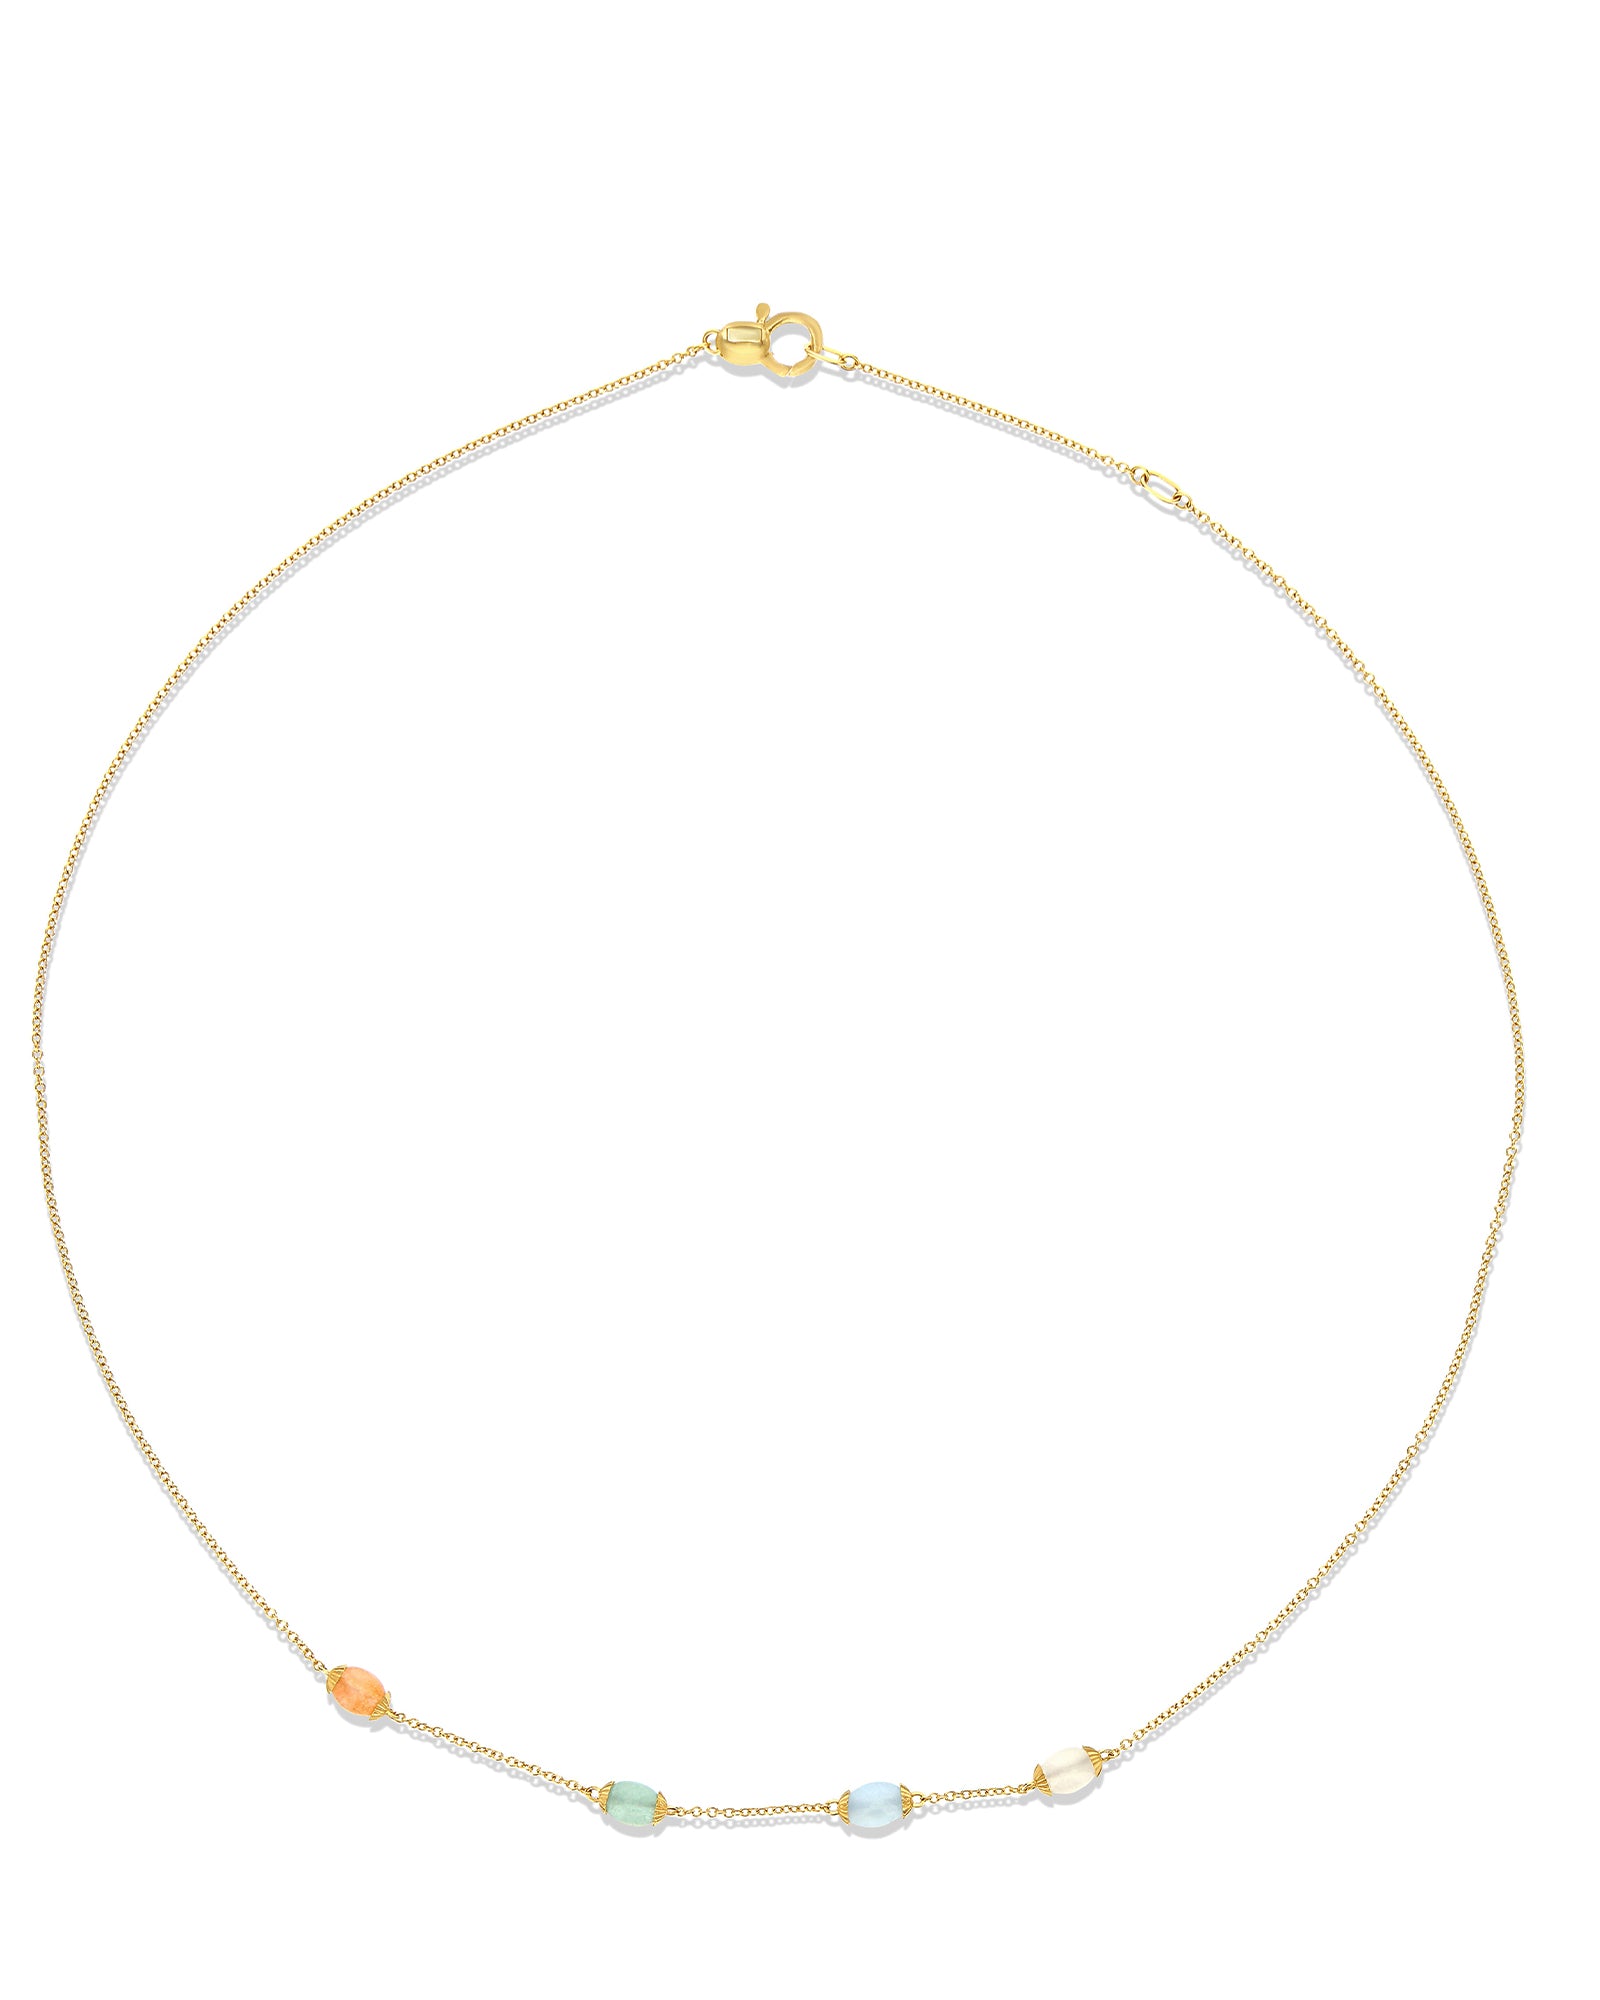 Rainbow "Amulets" Gold and Natural Stones Necklace (SMALL)